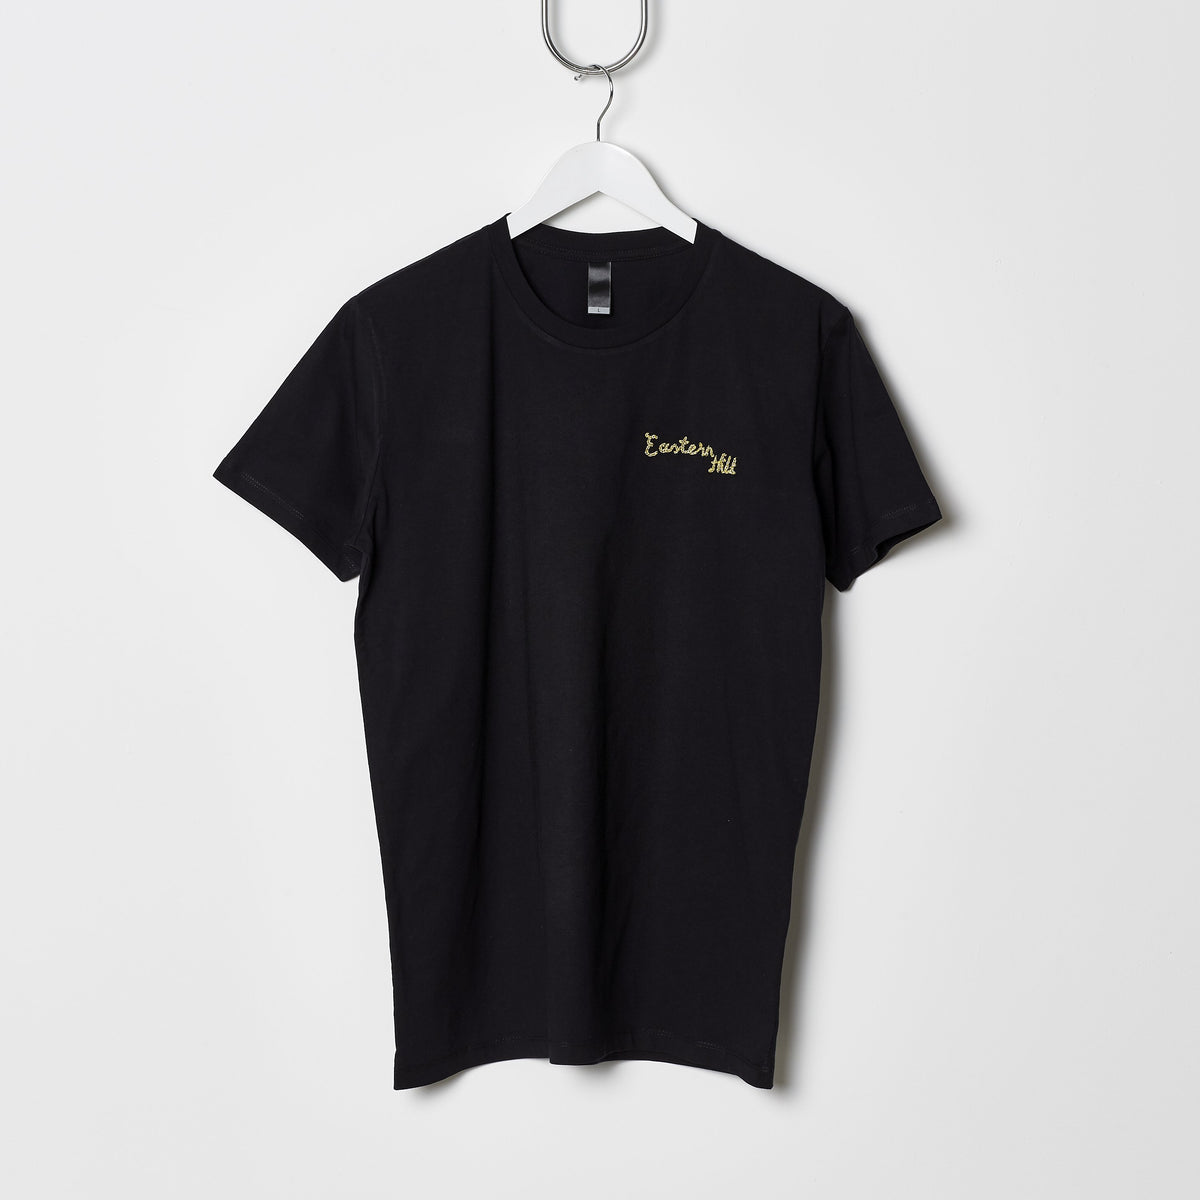 Eastern Hill General Supplies Chain Stitch Embroidered Tee - Black/Gold